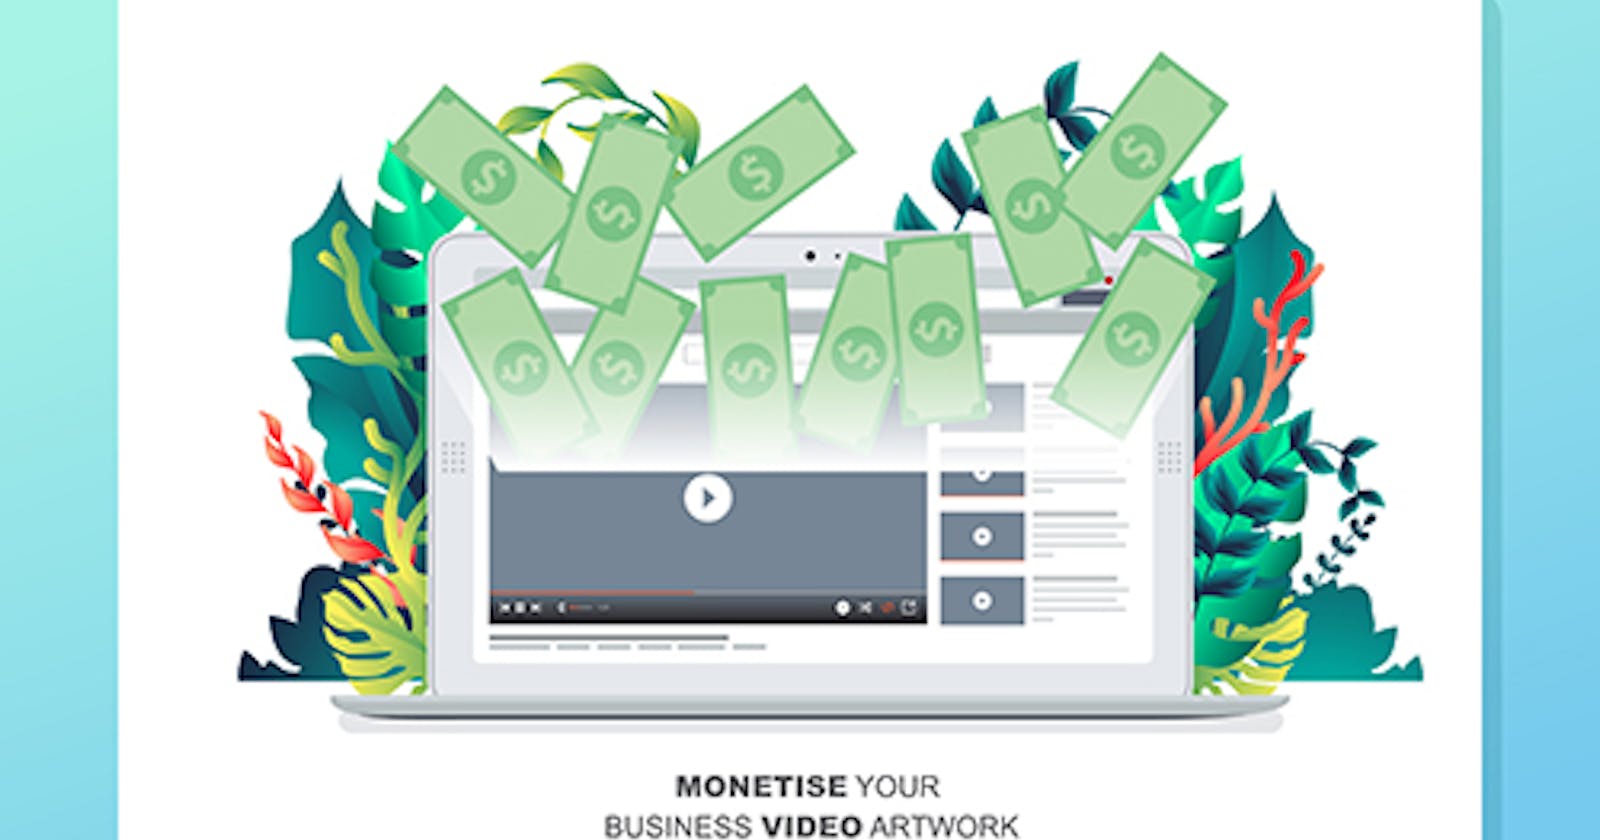 Top Qualities to Look For in a Video Monetization Platform